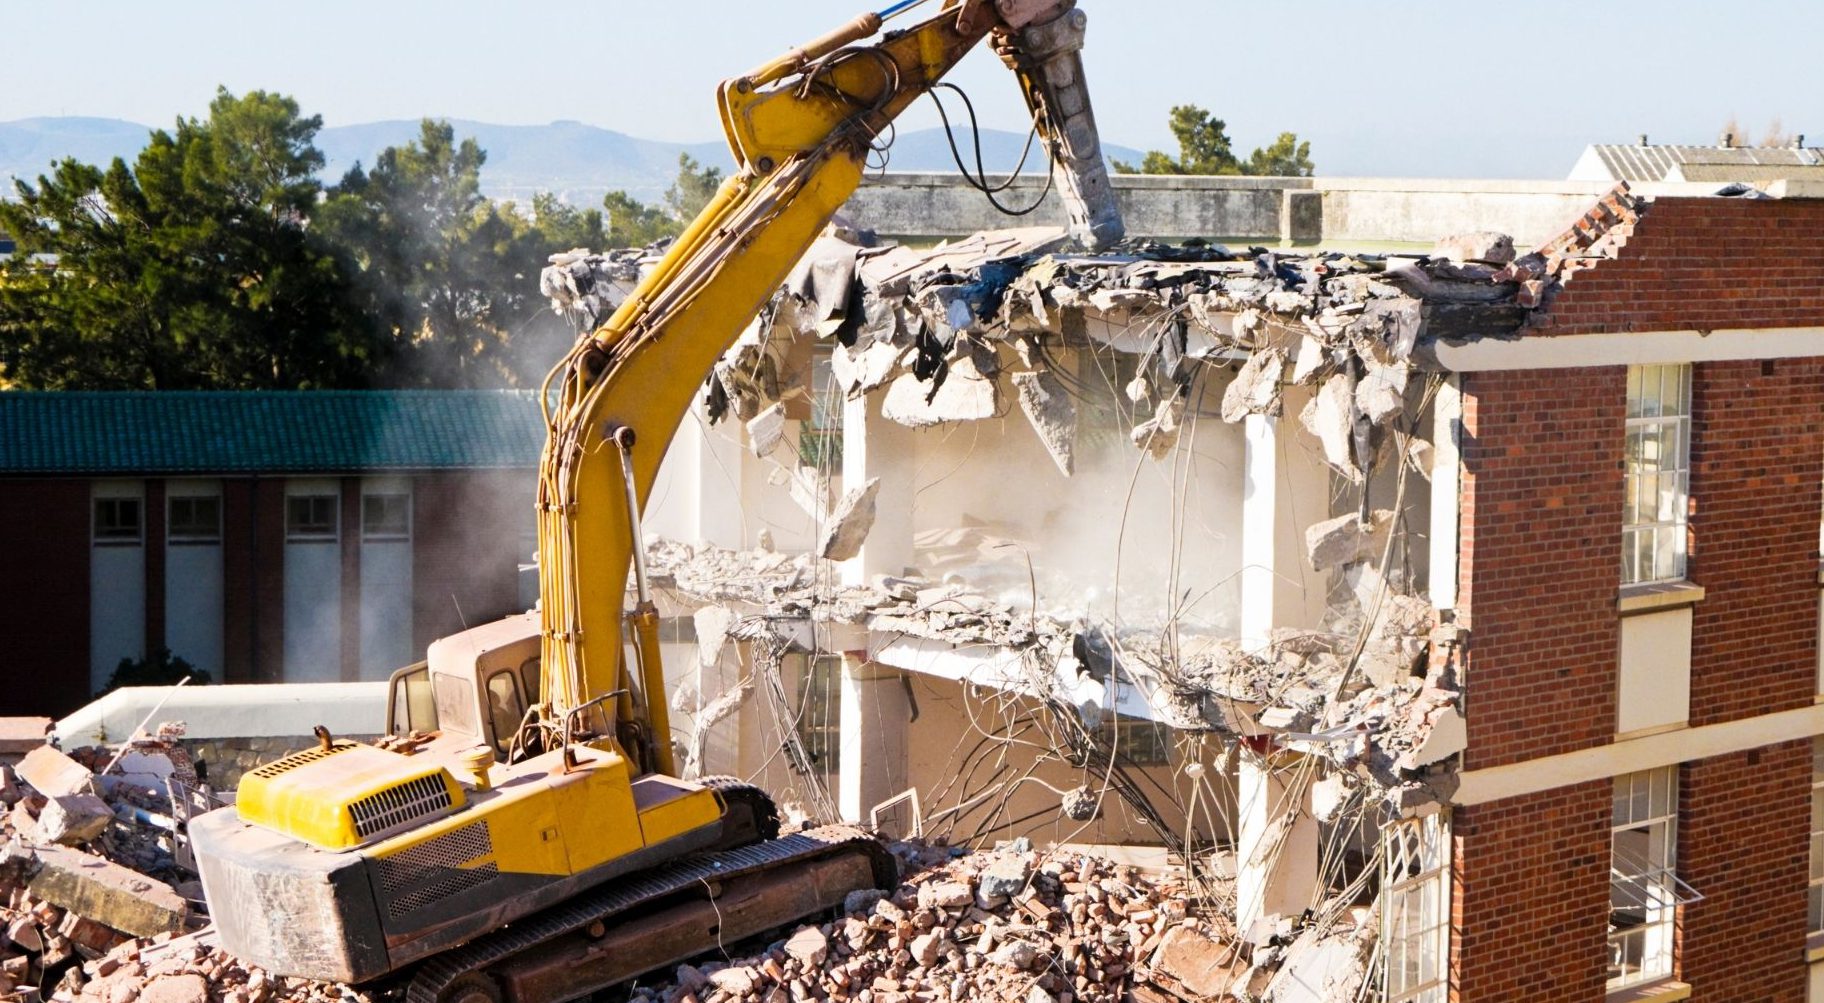 Global Construction And Demolition Waste Management Market Outlook, Opportunities And Strategies – Includes Construction Industry